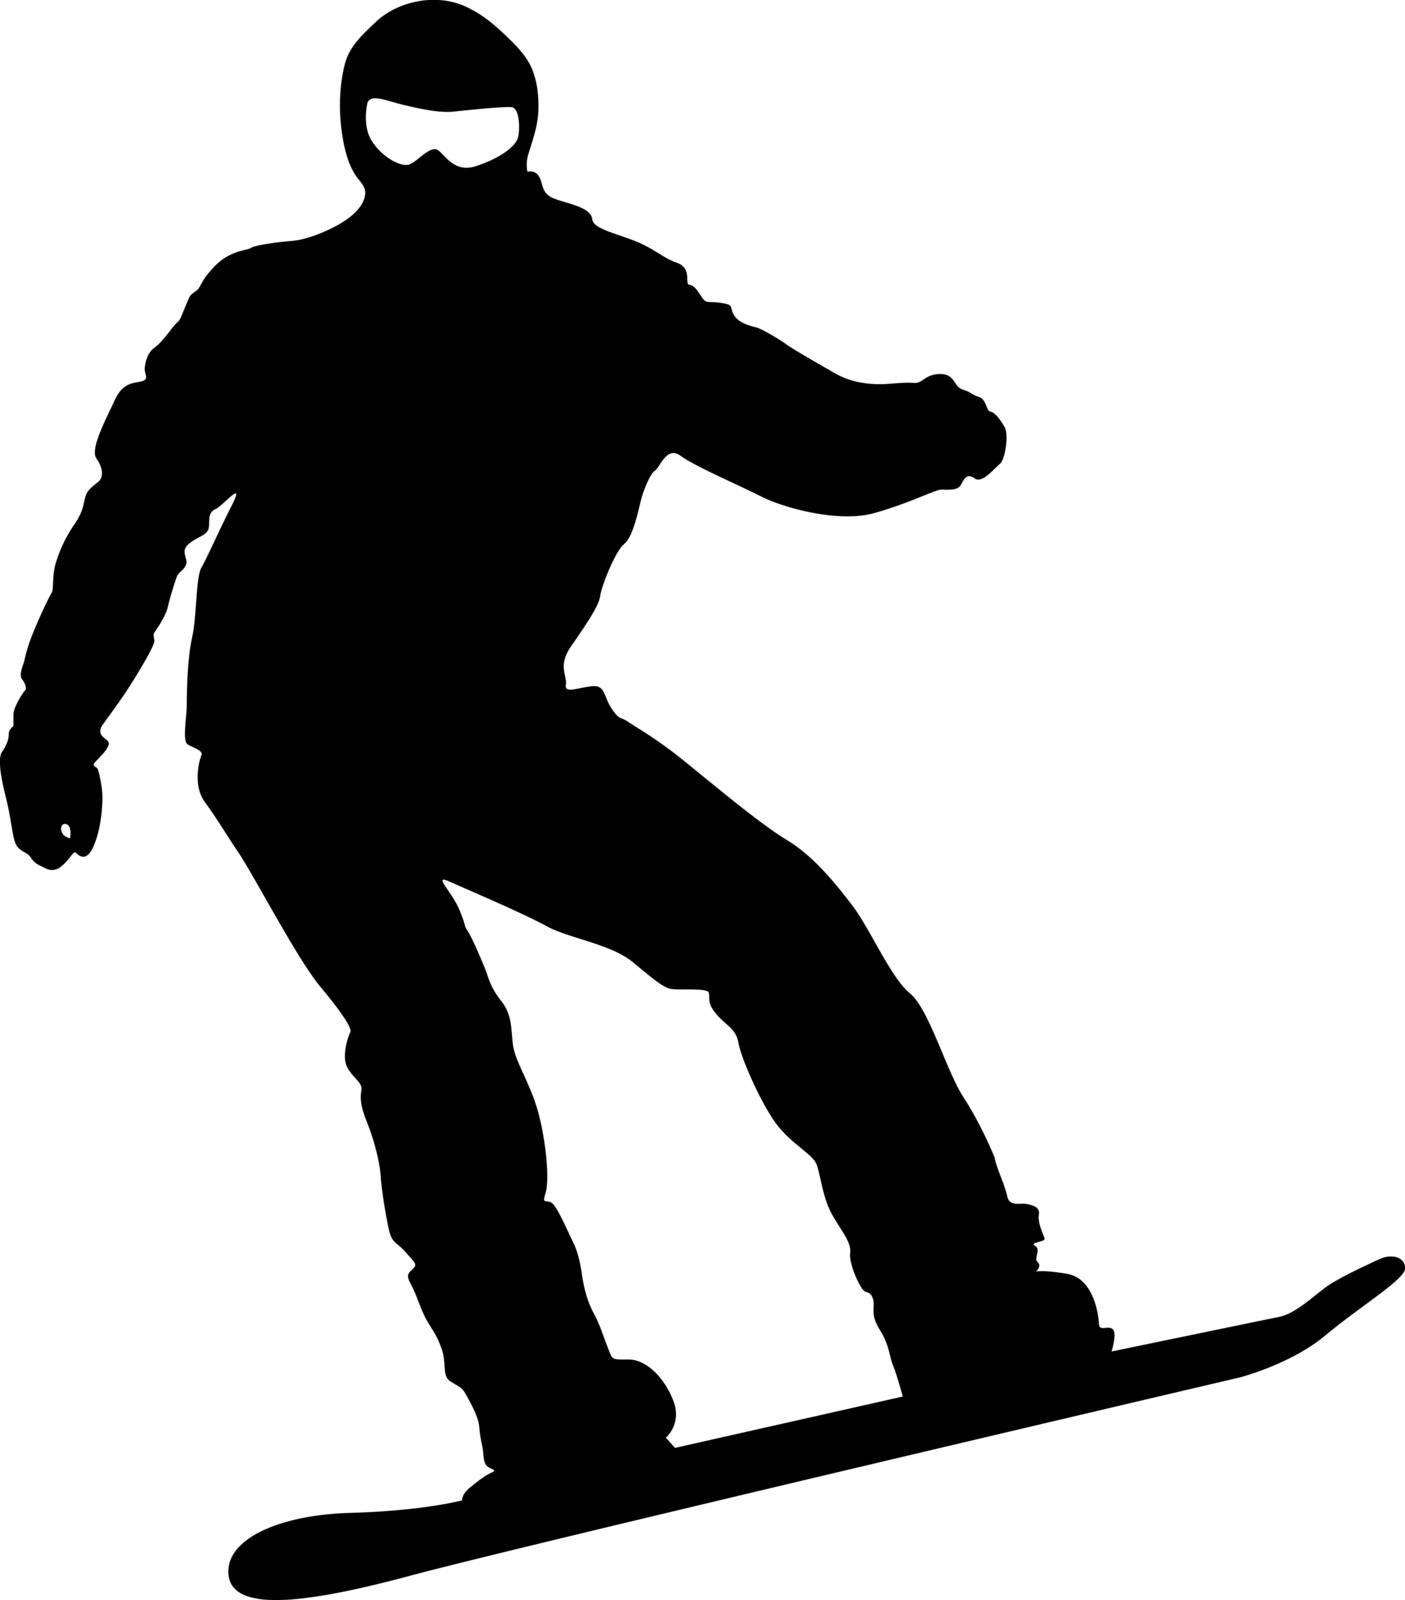 Black silhouettes snowboarders on white background. Vector illu by aarrows